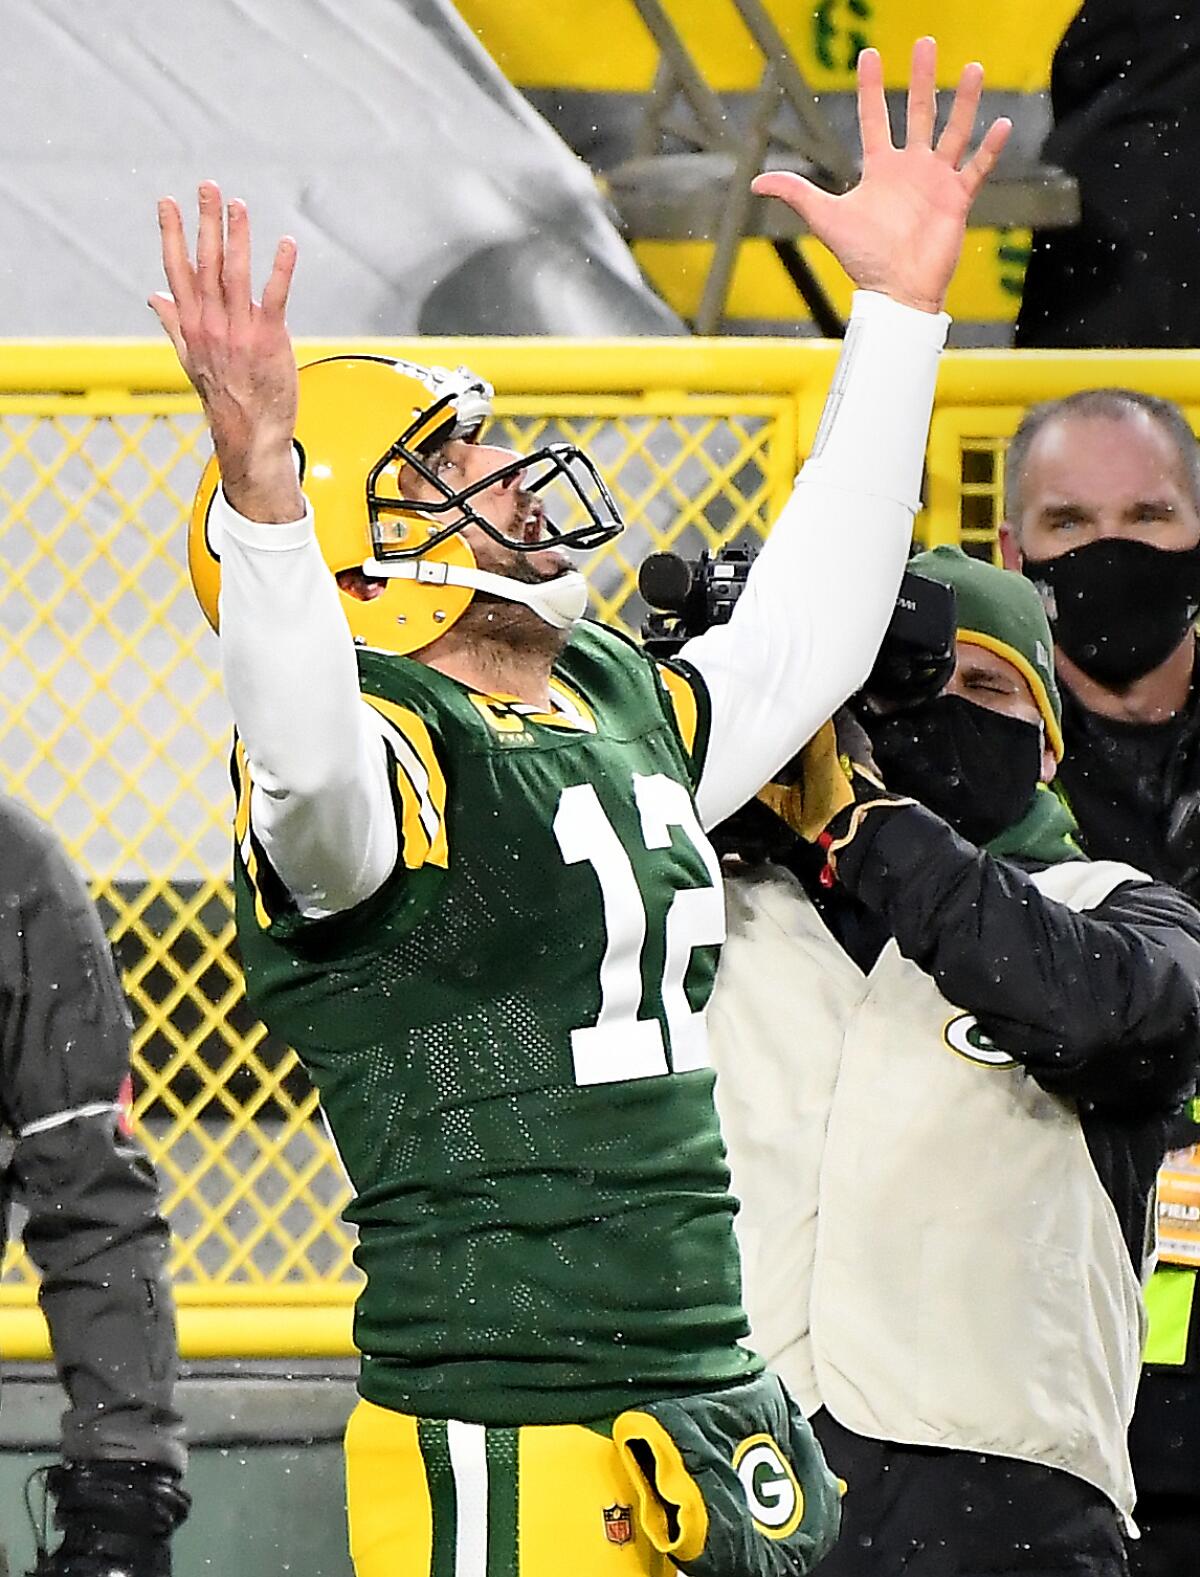 Packers quarterback Aaron Rodgers celebrates after running for a touchdown against the Rams on Jan. 16, 2021.